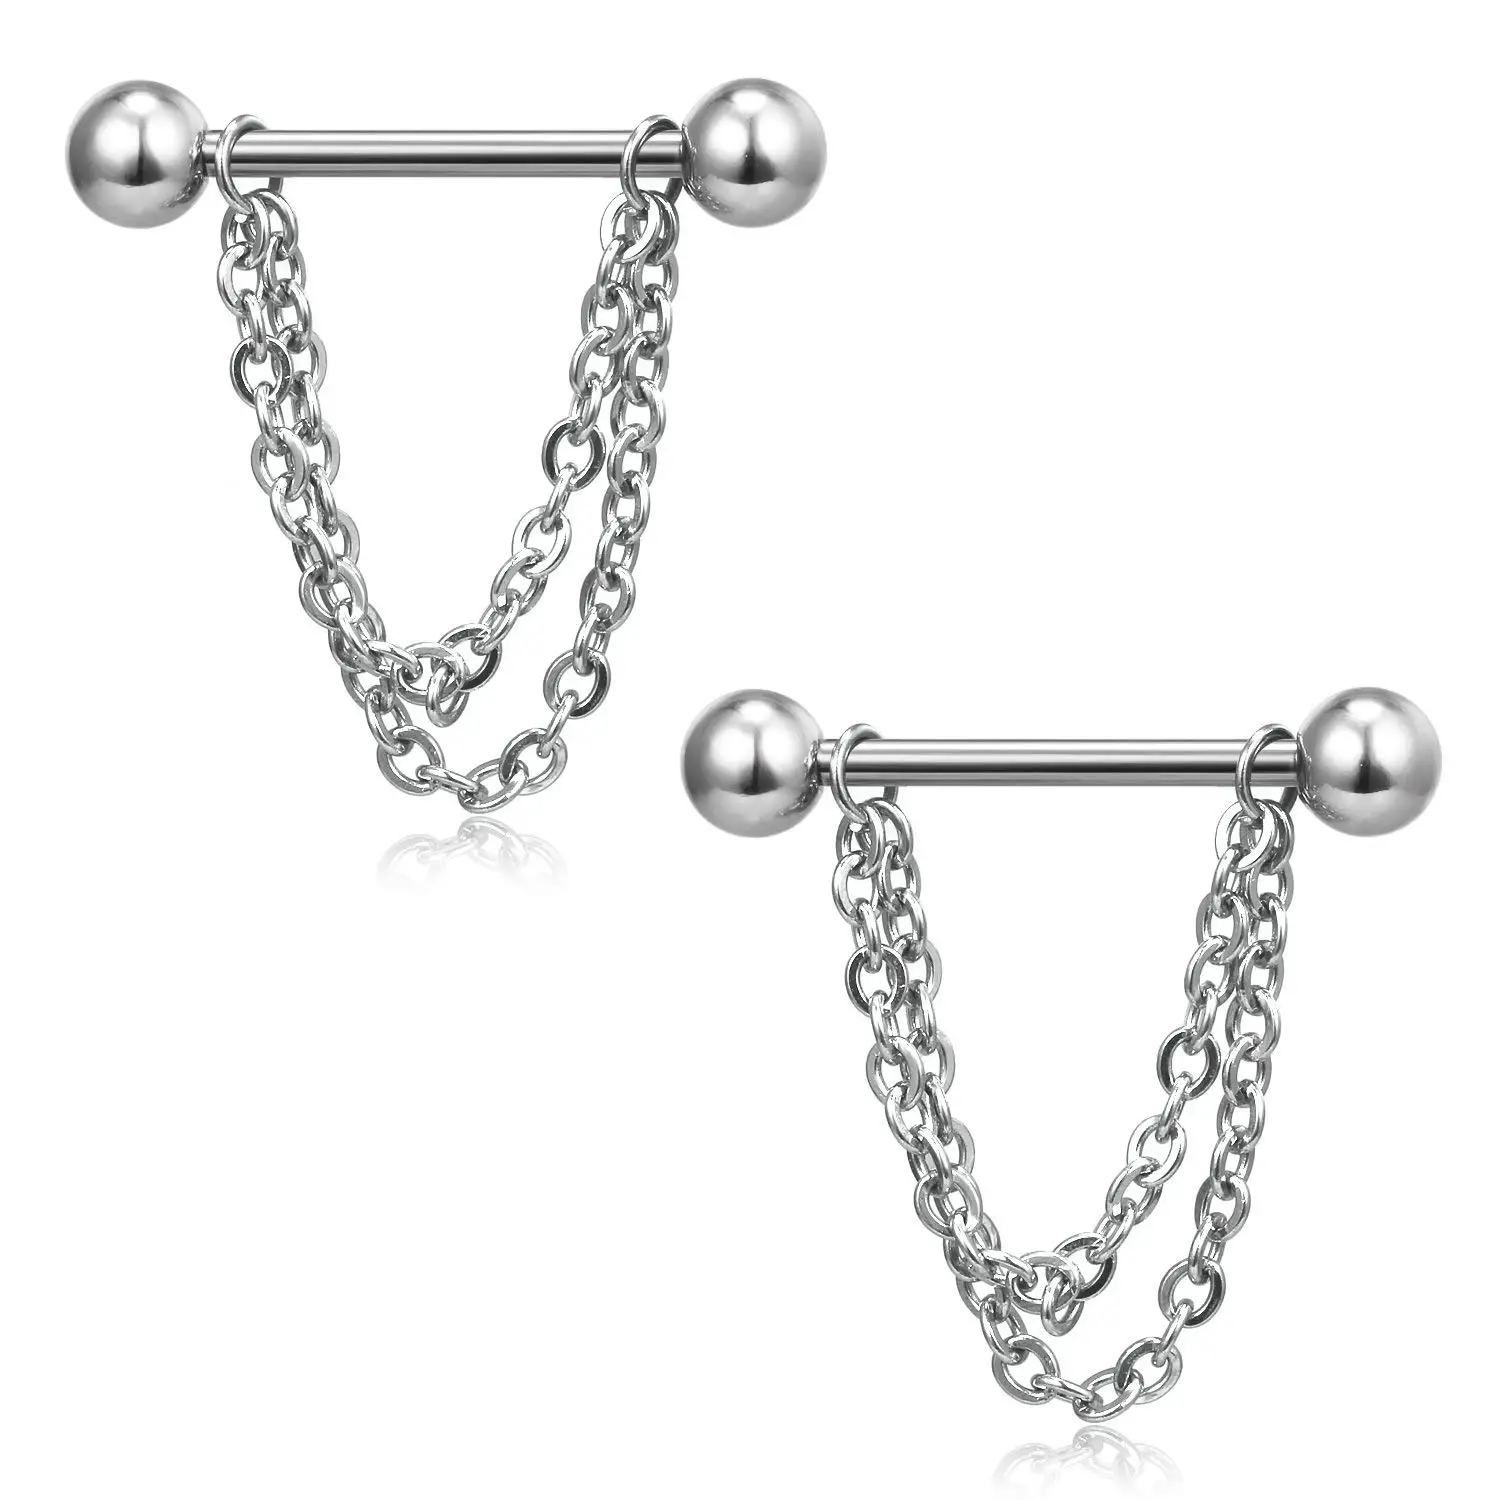 Double Stranded Nipple Piercing Ring 316l Stainless Steel Sexy Nipple Body Jewelry Buy Nipple